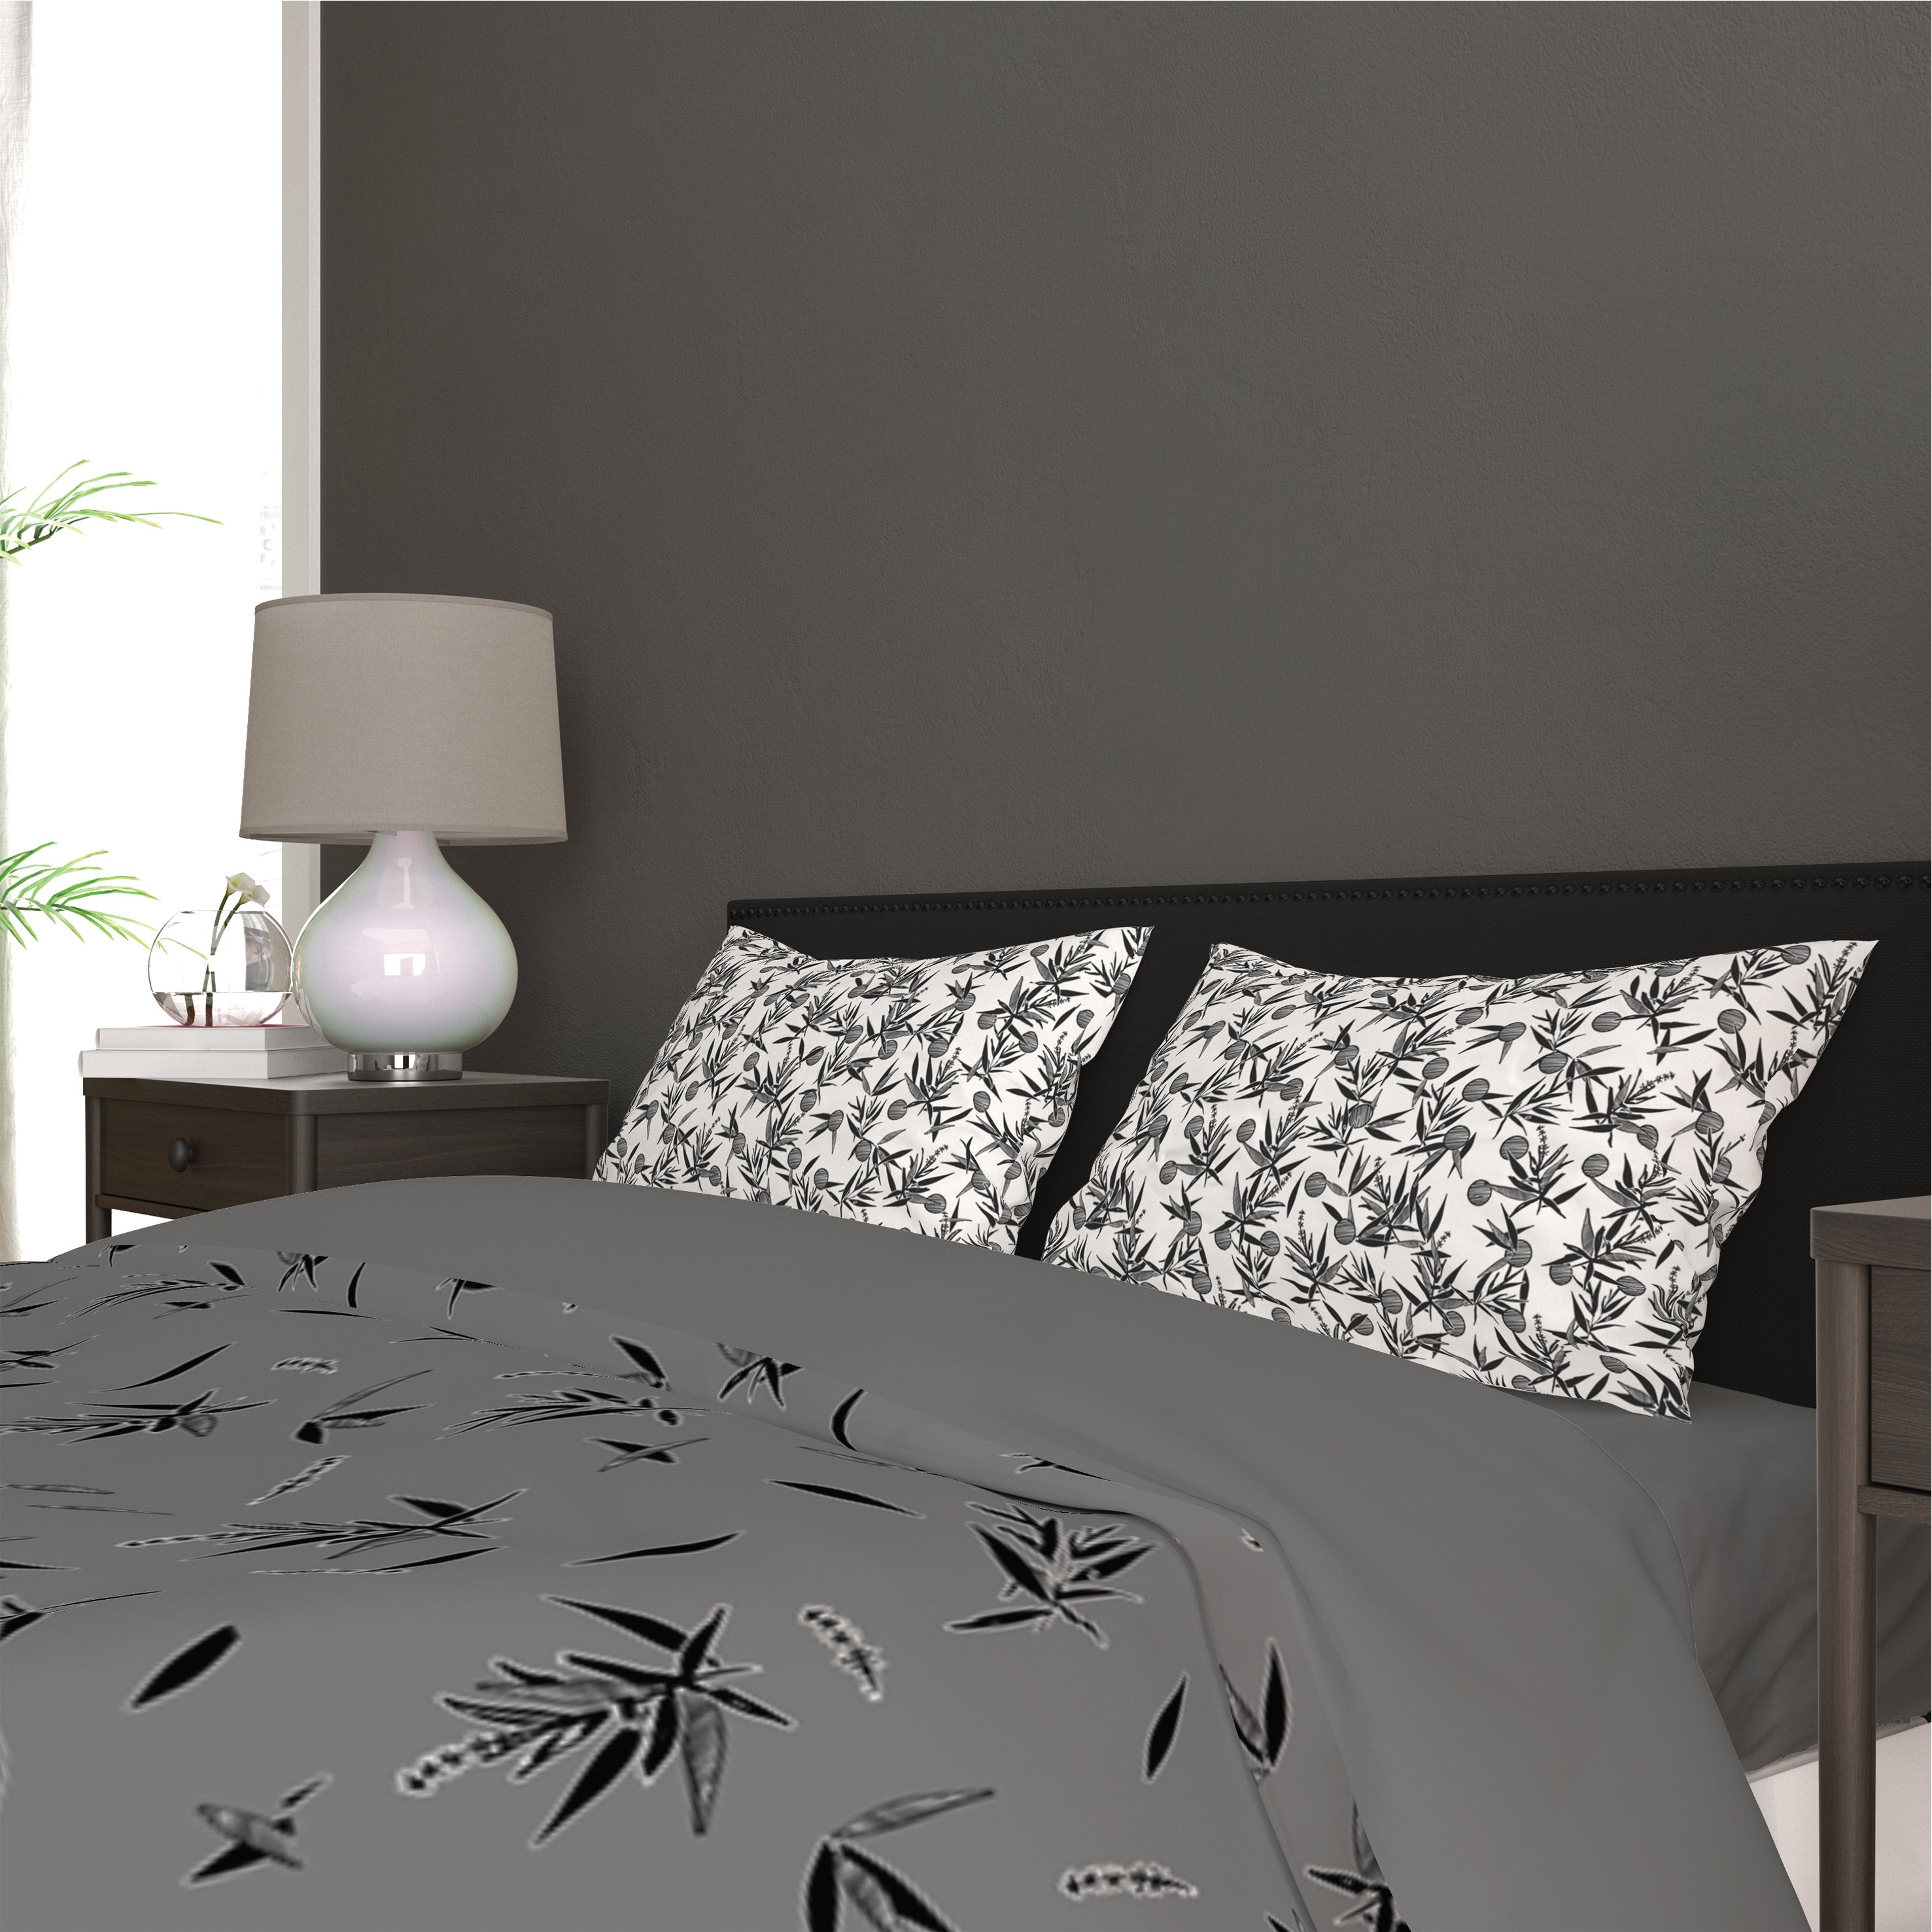 Bed with a gray and white comforter and pillows.